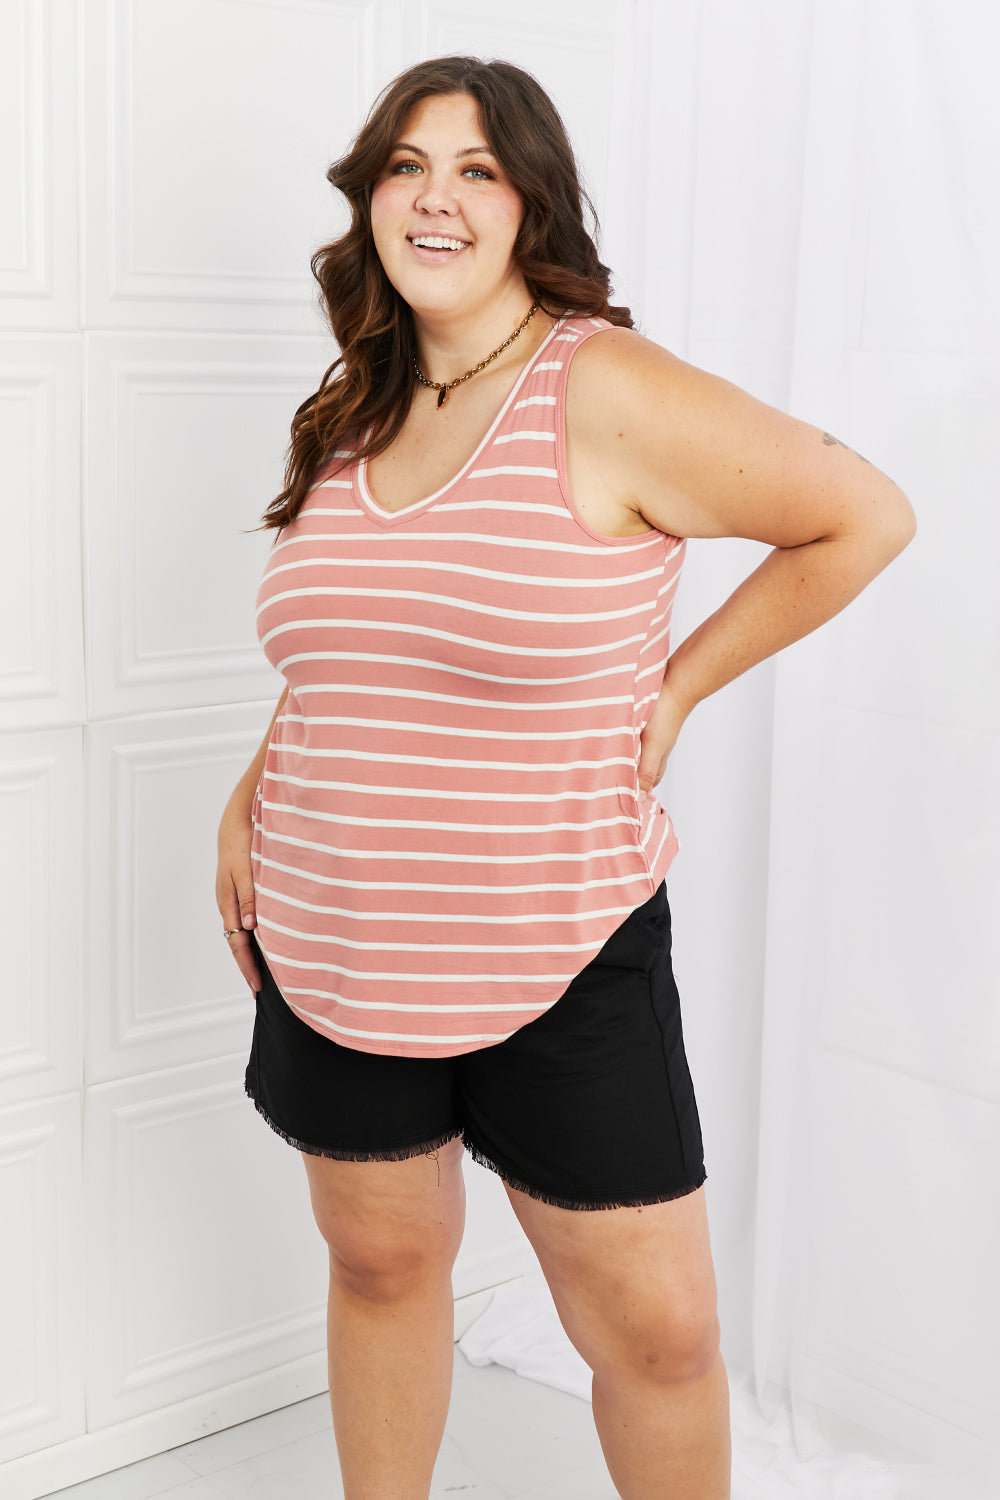 Find Your Path  Sleeveless Striped Top - Alonna's Legging Land